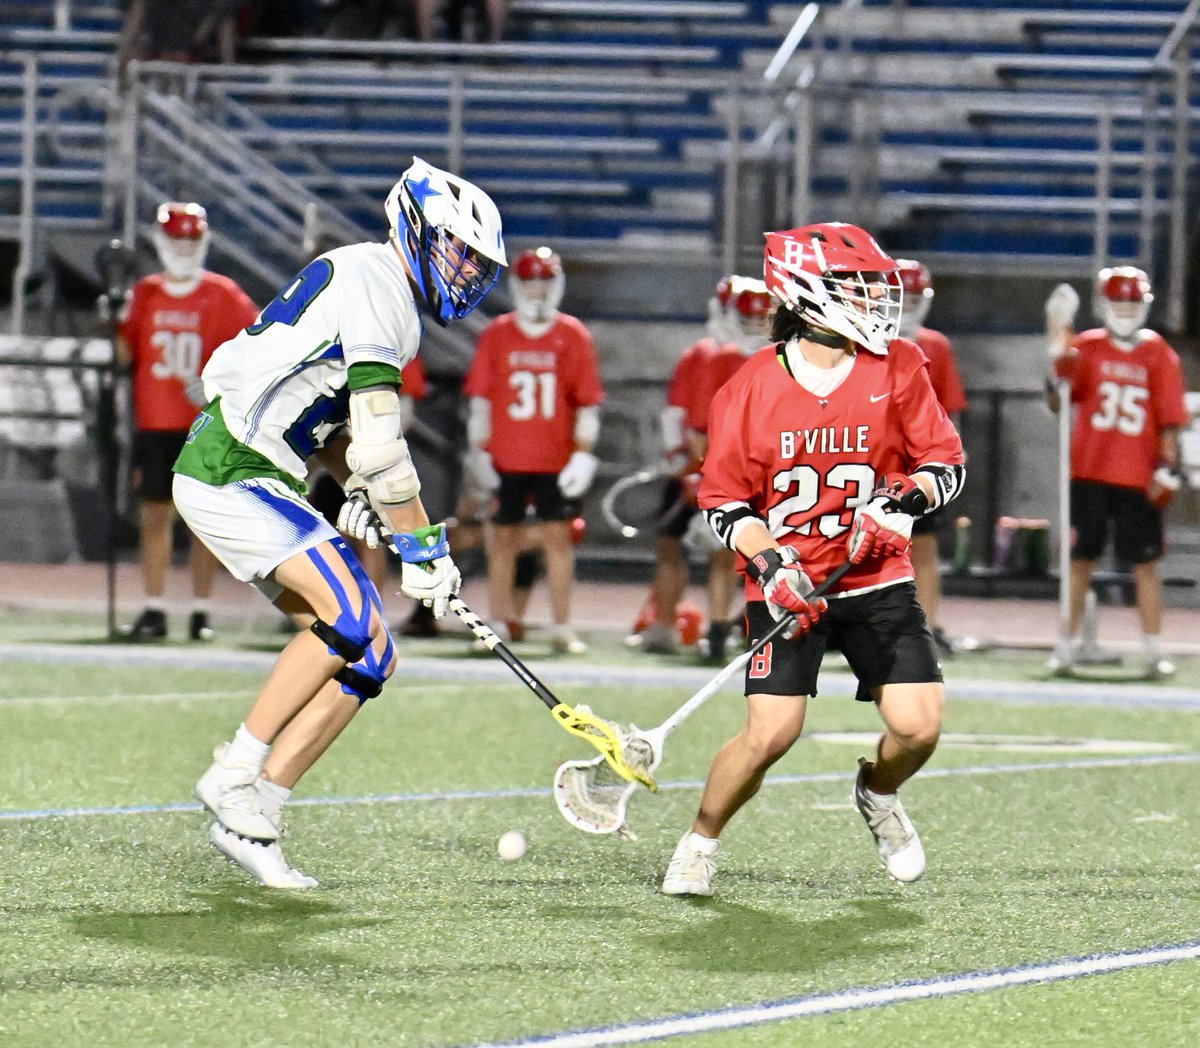 The @CNSAthletics @cns_lacrosse offense got the lead and the defense protected it for a 12-10 win over the @Bville_Bees @Bville_Boys_Lax in @NYSPHSAA #boys #section3lacrosse #sports #photography